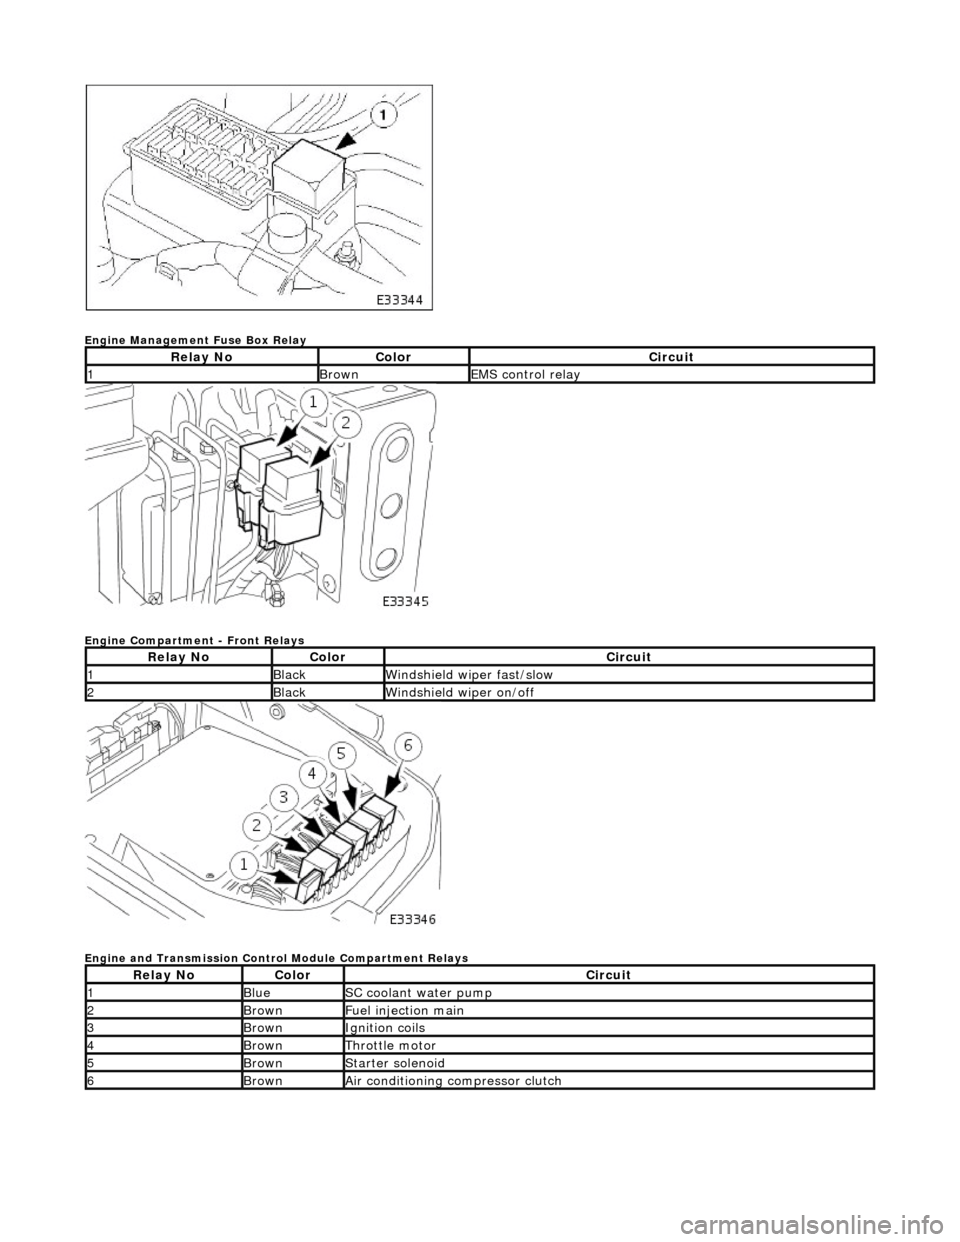 JAGUAR X308 1998 2.G Manual PDF  
Engine Management Fuse Box Relay 
 
Engine Compartment - Front Relays 
 
Engine and Transmission Control Module Compartment Relays 
Relay NoColorCircuit
1BrownEMS control relay
Relay NoColorCircuit
